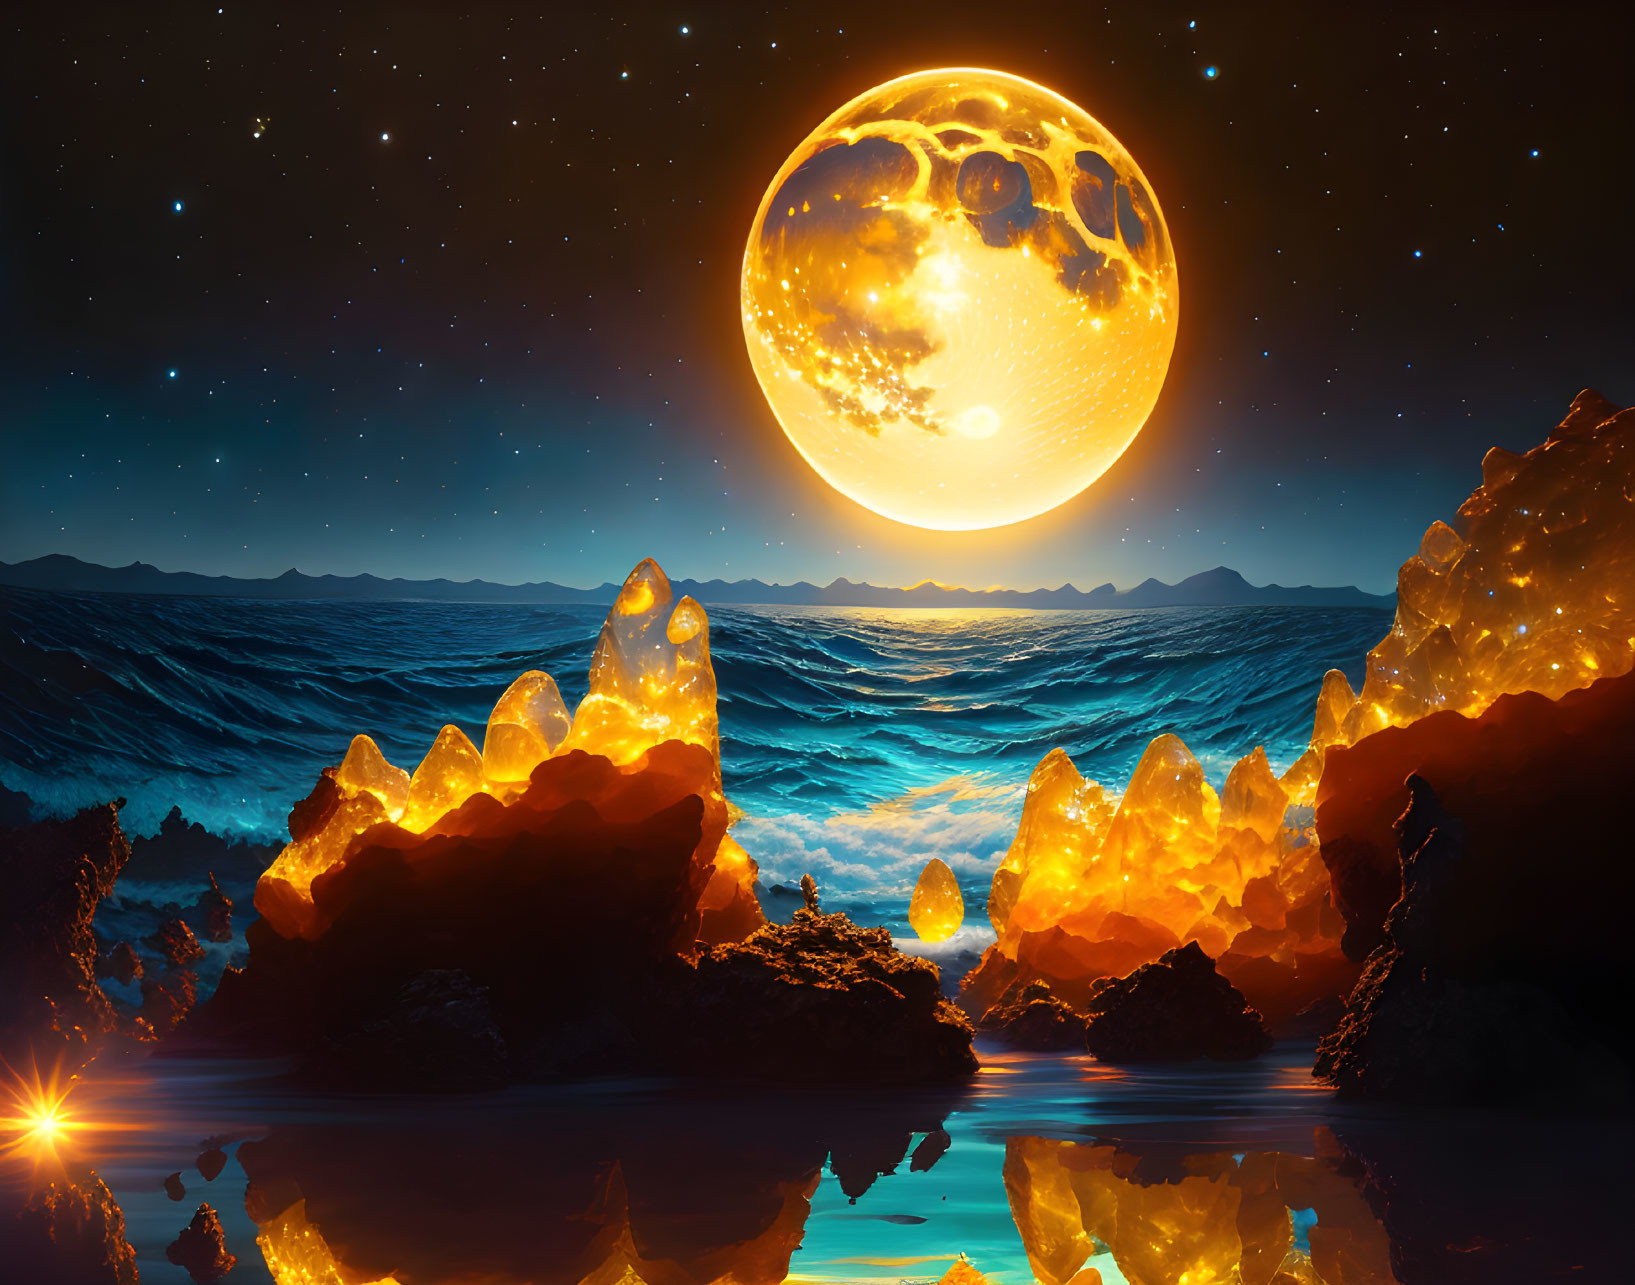 Fantastical seascape with glowing moon and luminous rocks